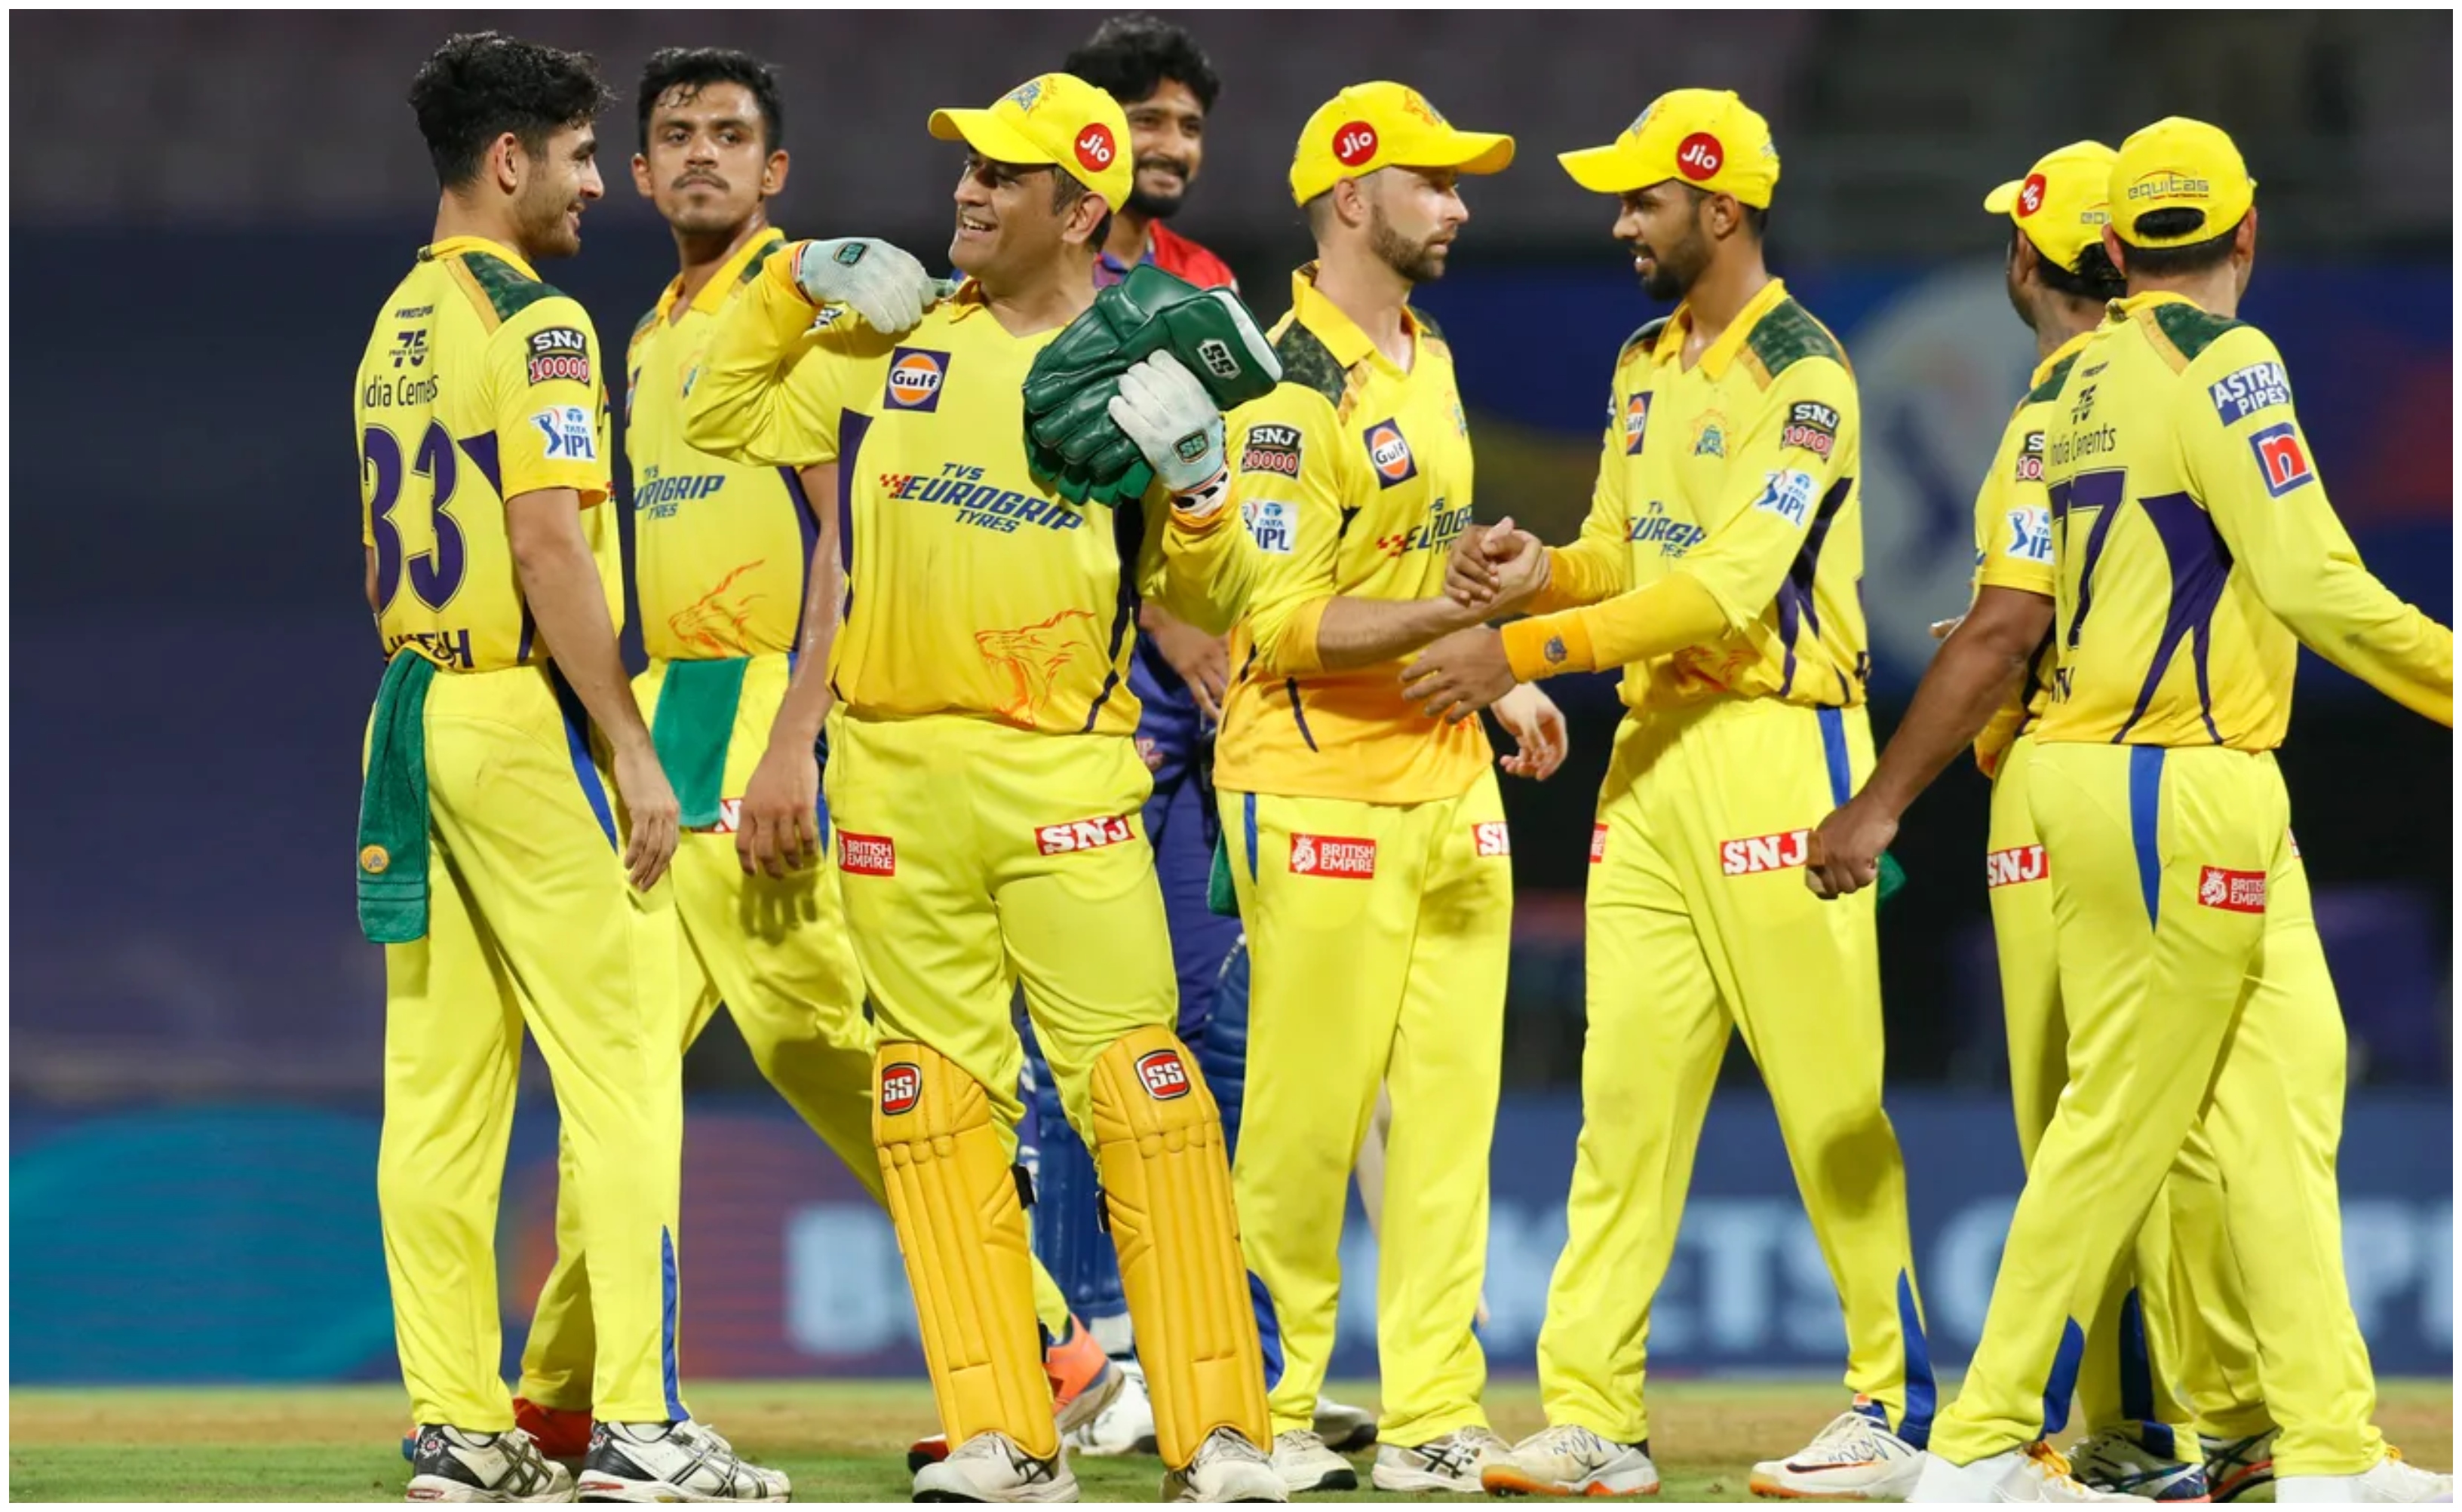 CSK outclassed DC in all departments | BCCI/IPL